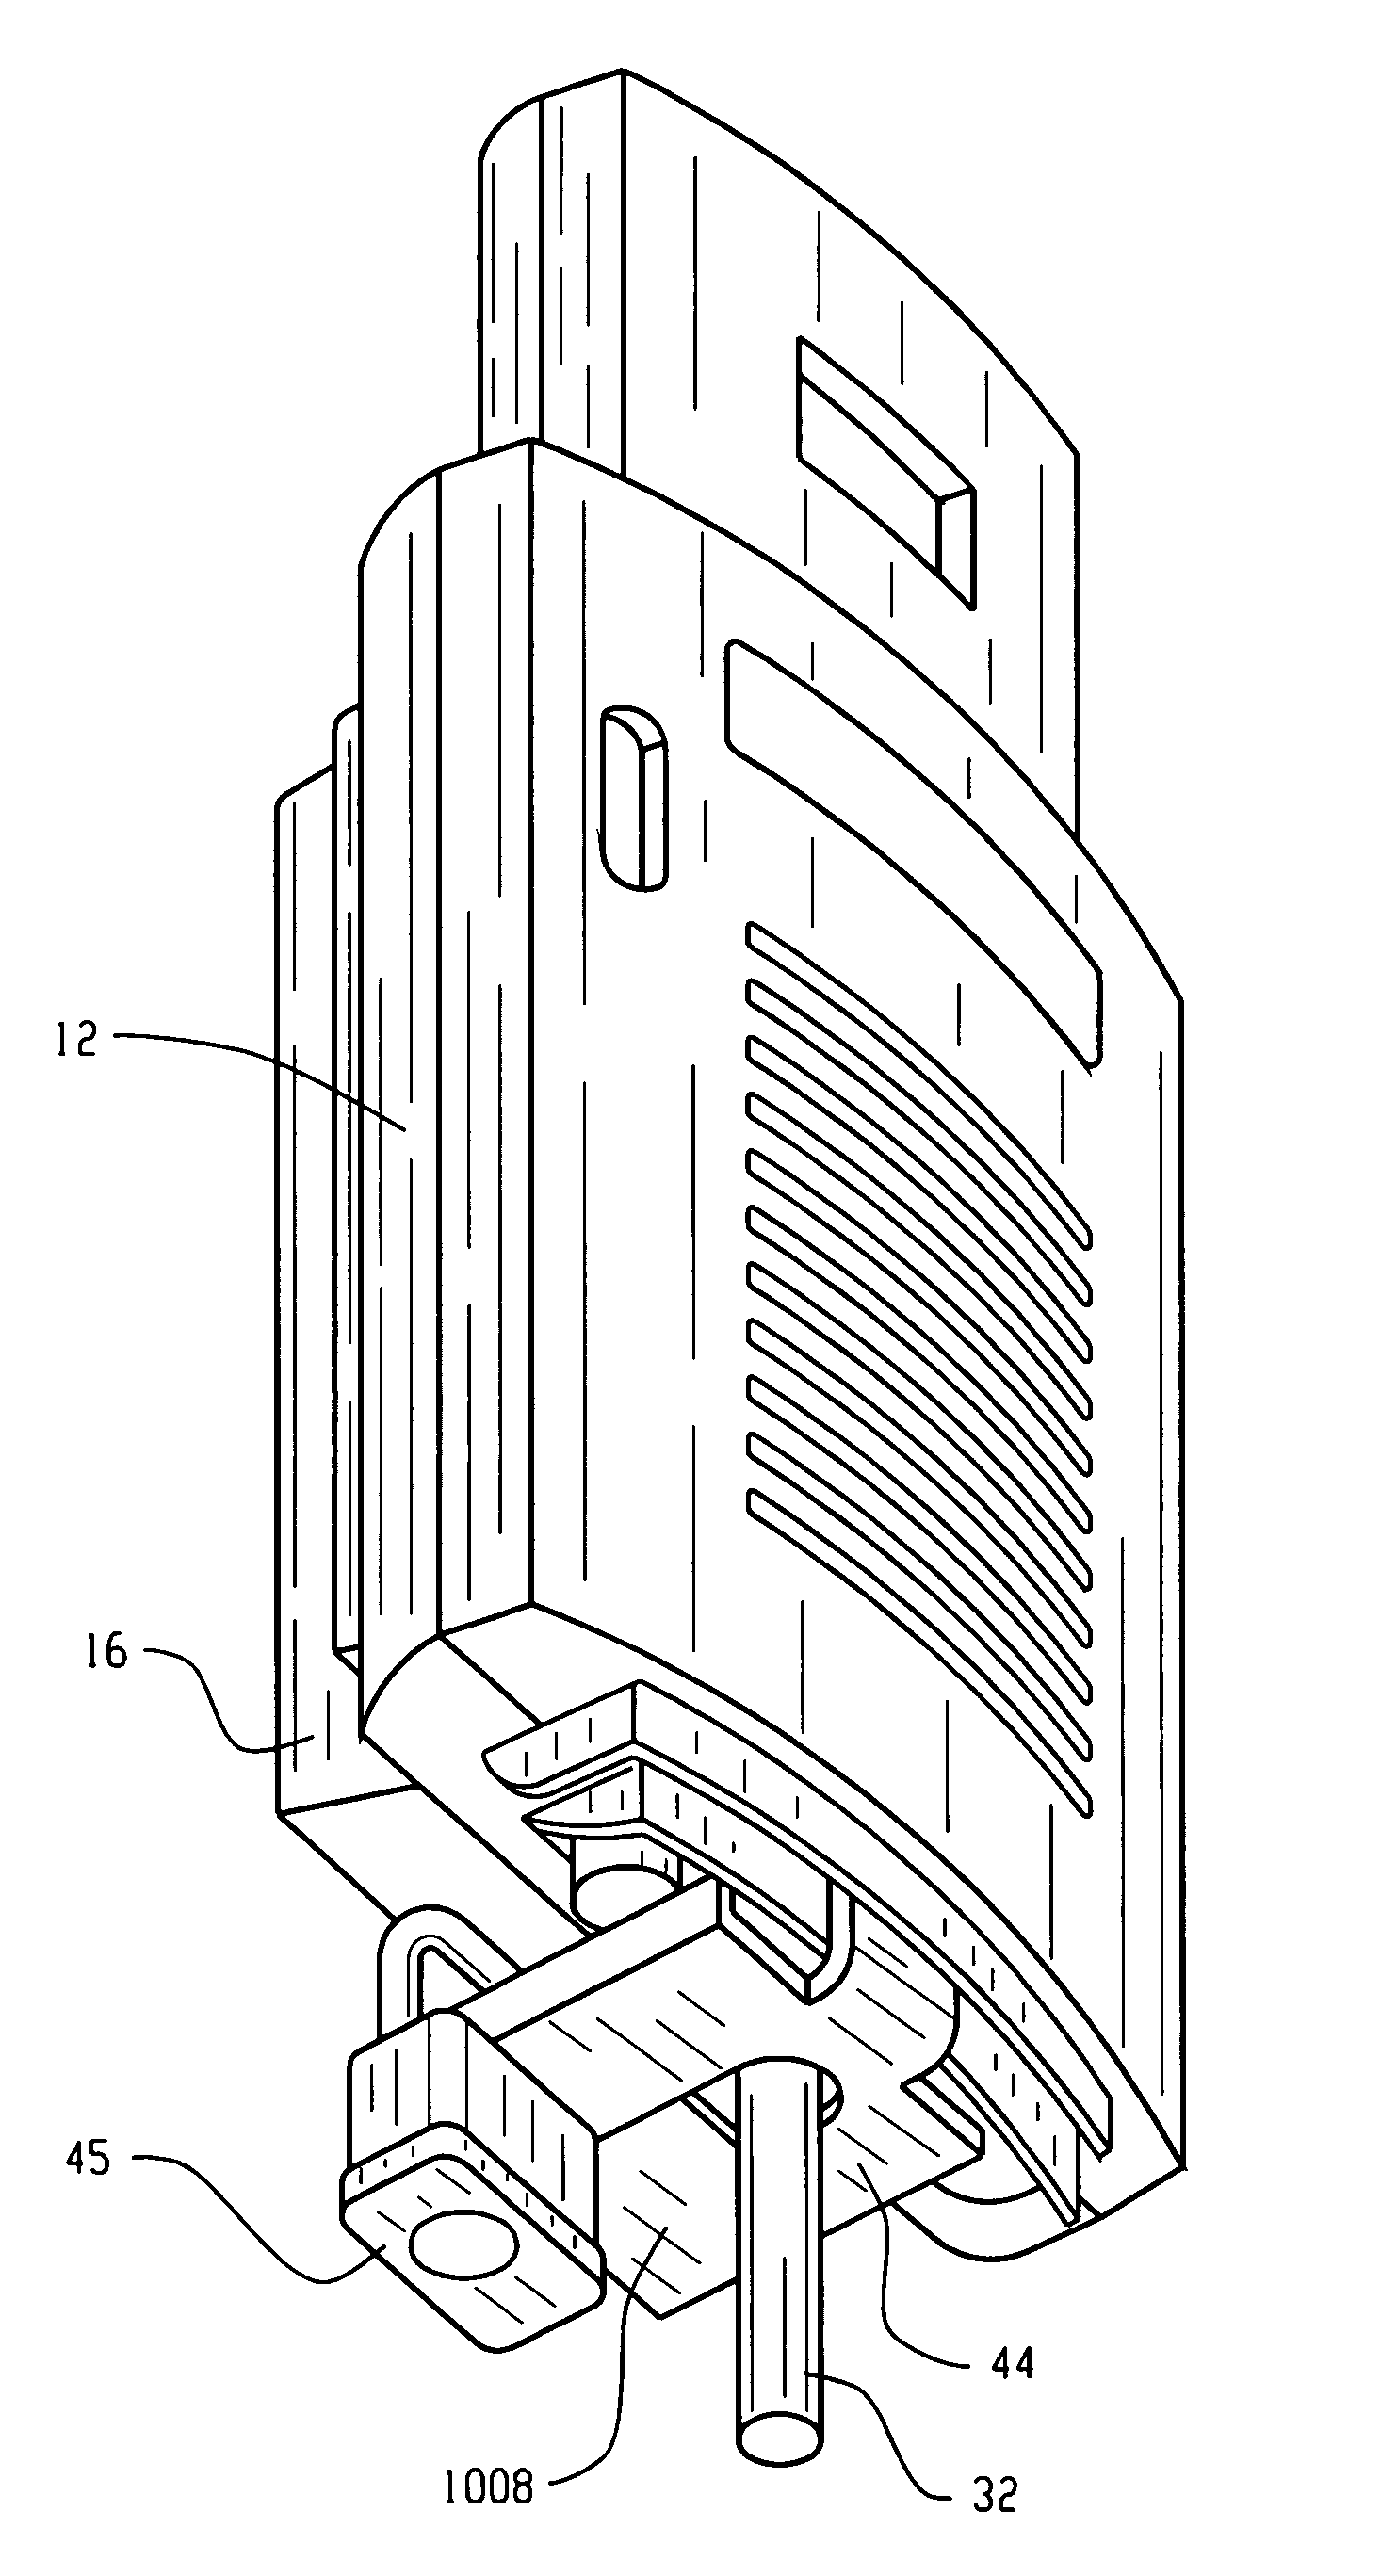 System for physically securing an access point and preventing the removal of associated connectors